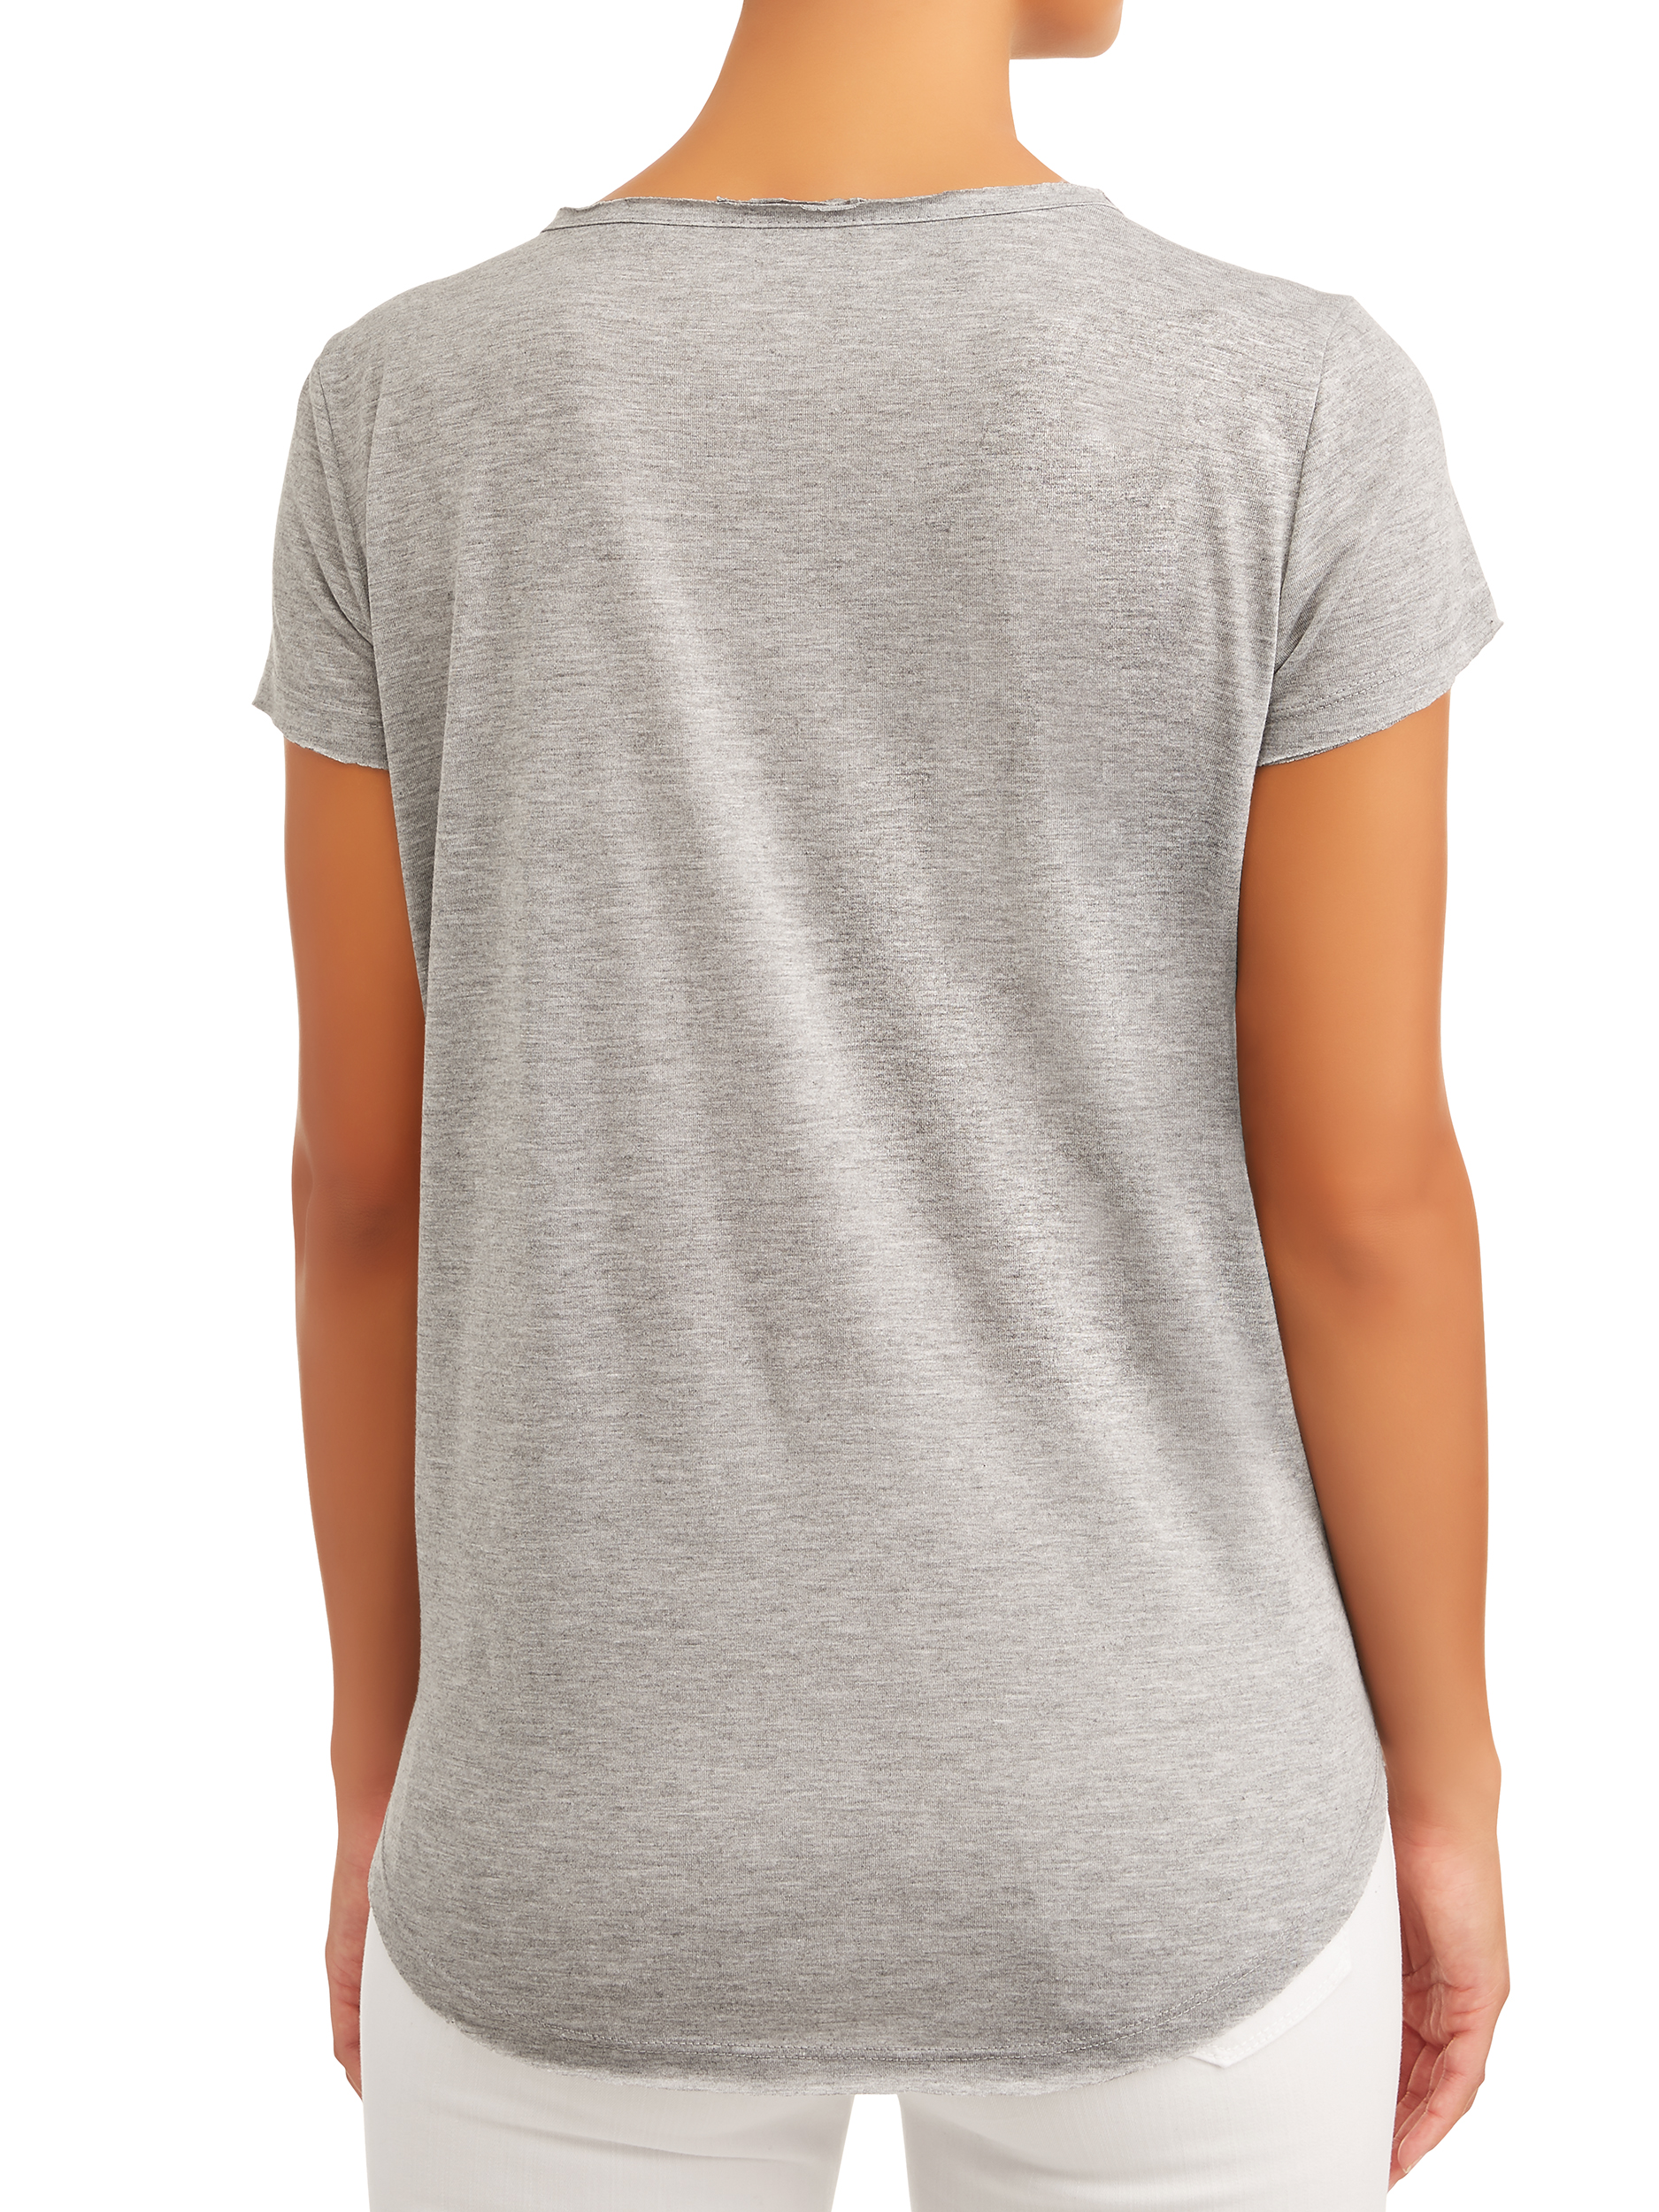 Sofia Jeans Scoop Neck Embroidered Tee Women's - image 5 of 7